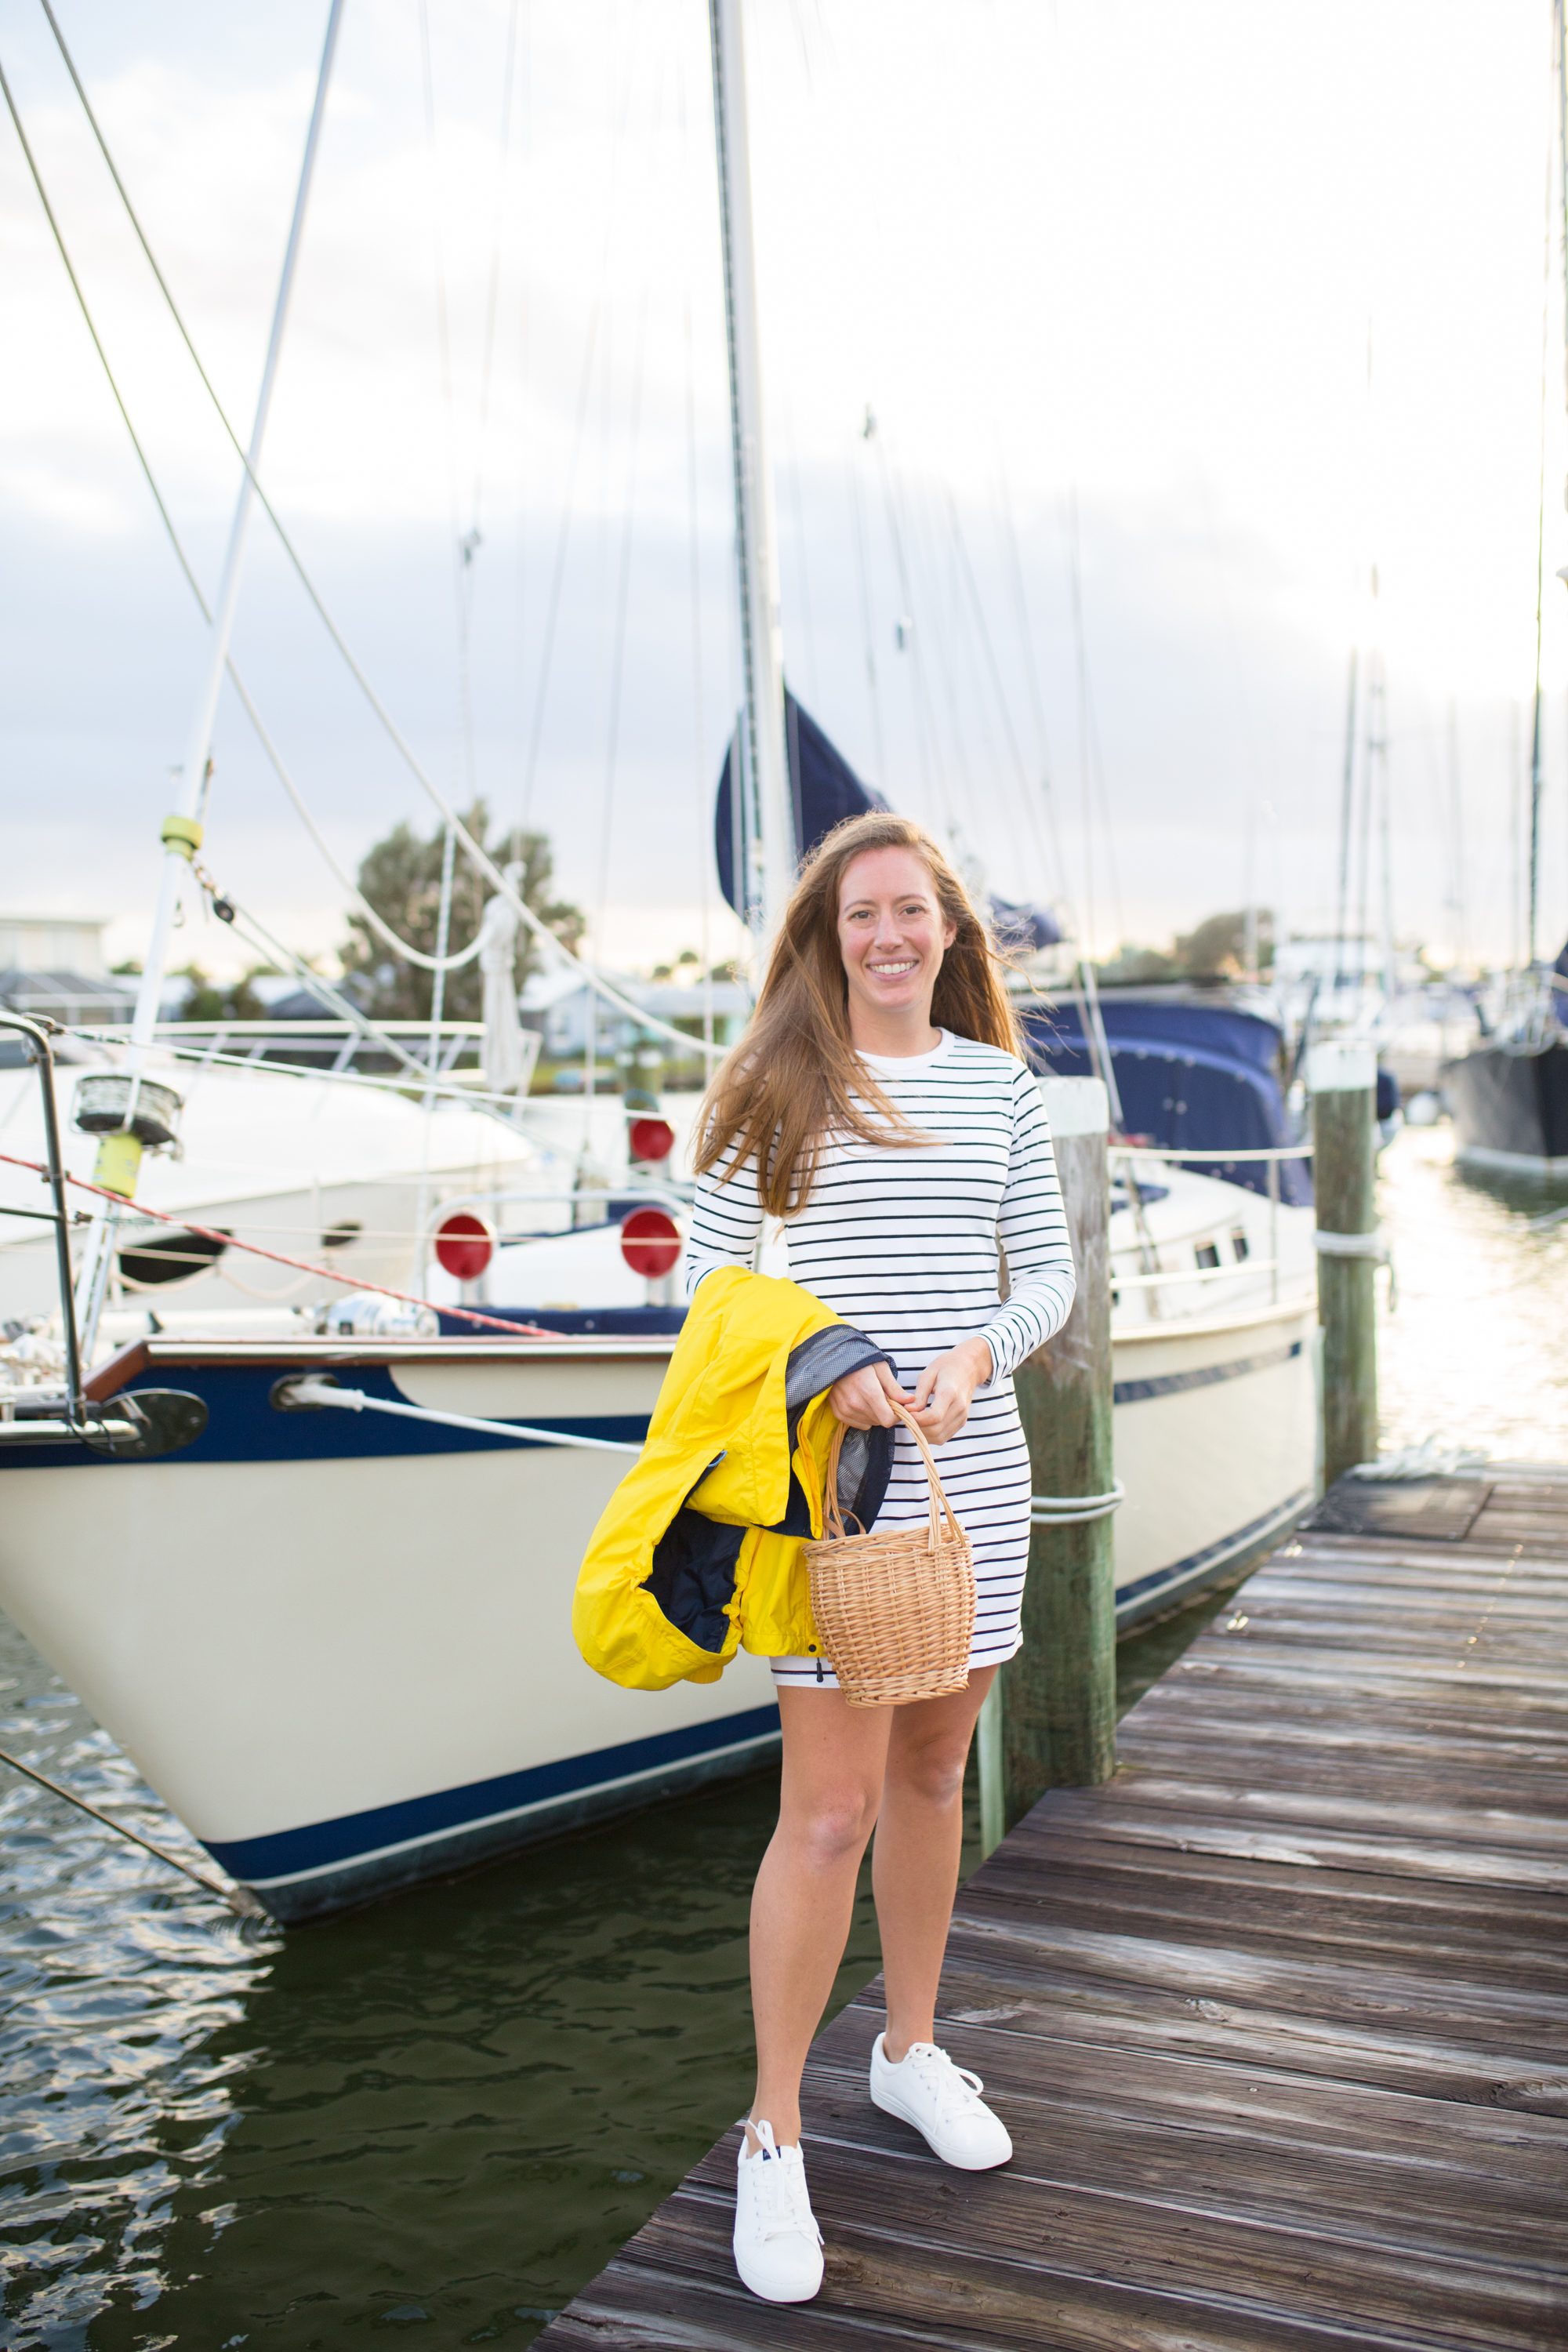 How to Style a Long Sleeve Striped Dress / Striped Dress Outfit / Blue Stripes / Yellow Raincoat / White Sneakers / Preppy Outfit / Coastal Outfit / Preppy Style Outfit / Cute Preppy Outfits / Nautical Outfit Women - Sunshine Style, A Florida Fashion and Lifestyle Blog